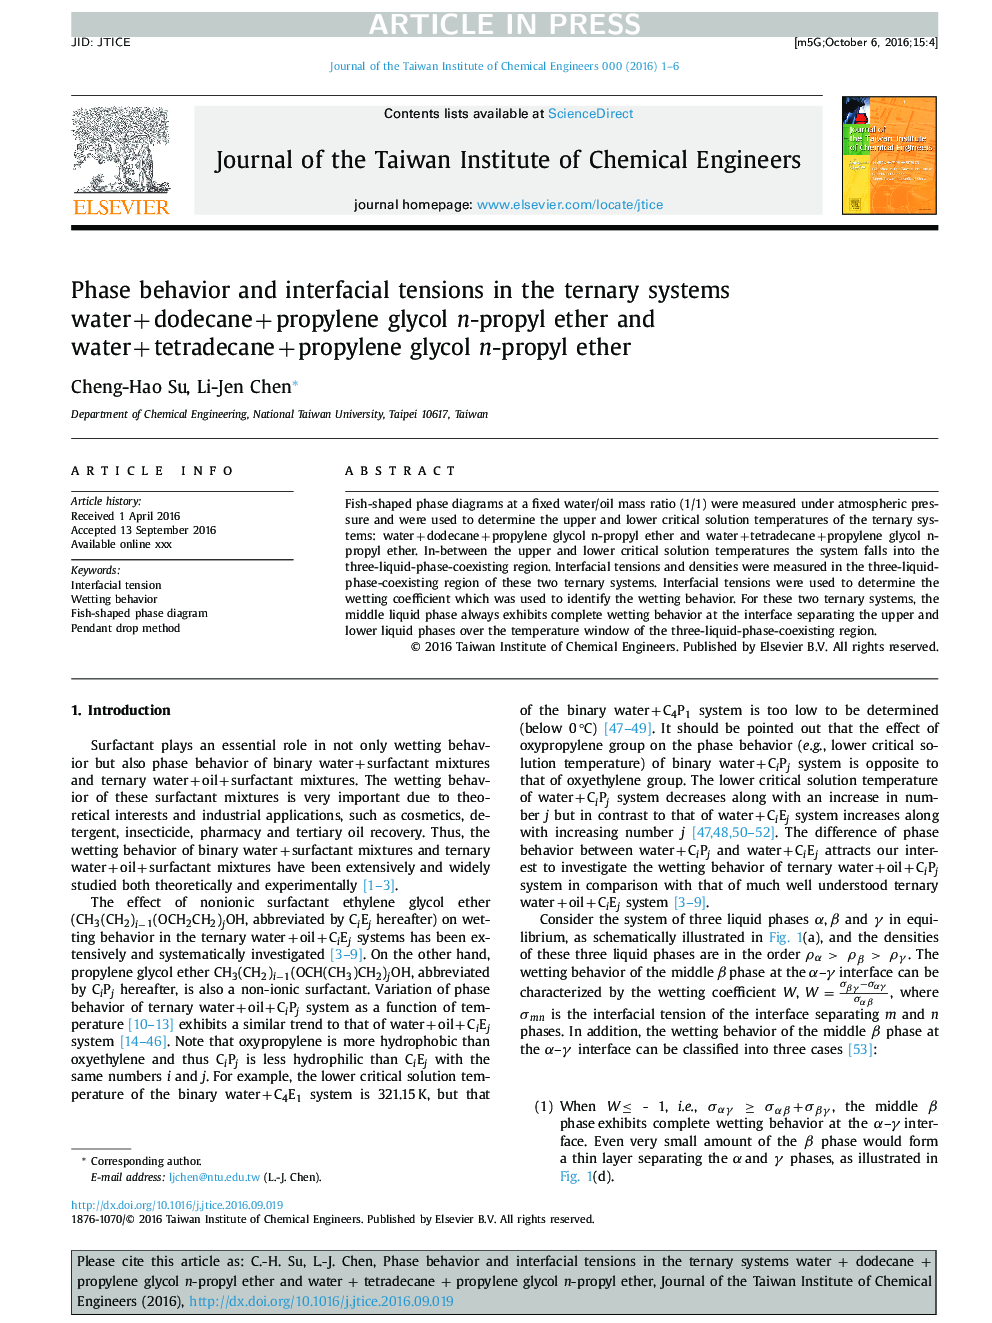 Phase behavior and interfacial tensions in the ternary systems waterÂ +Â dodecaneÂ +Â propylene glycol n-propyl ether and waterÂ +Â tetradecaneÂ +Â propylene glycol n-propyl ether